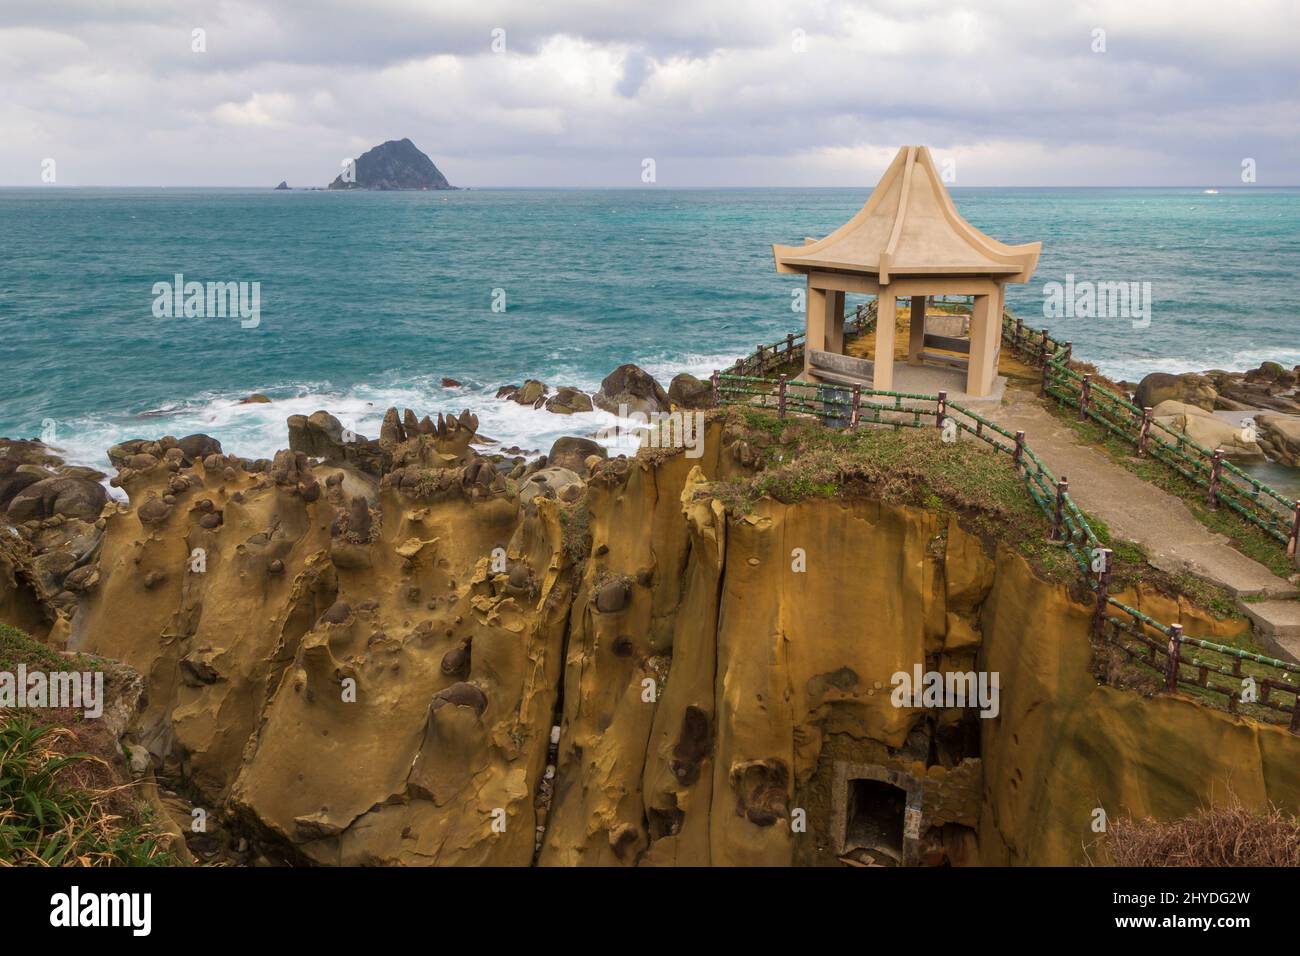 Gazebo, bizarre rocky terrain and rock formations at the Heping (Hoping) Island Park (also known as Peace Island Park) in Keelung, Taiwan. Stock Photo